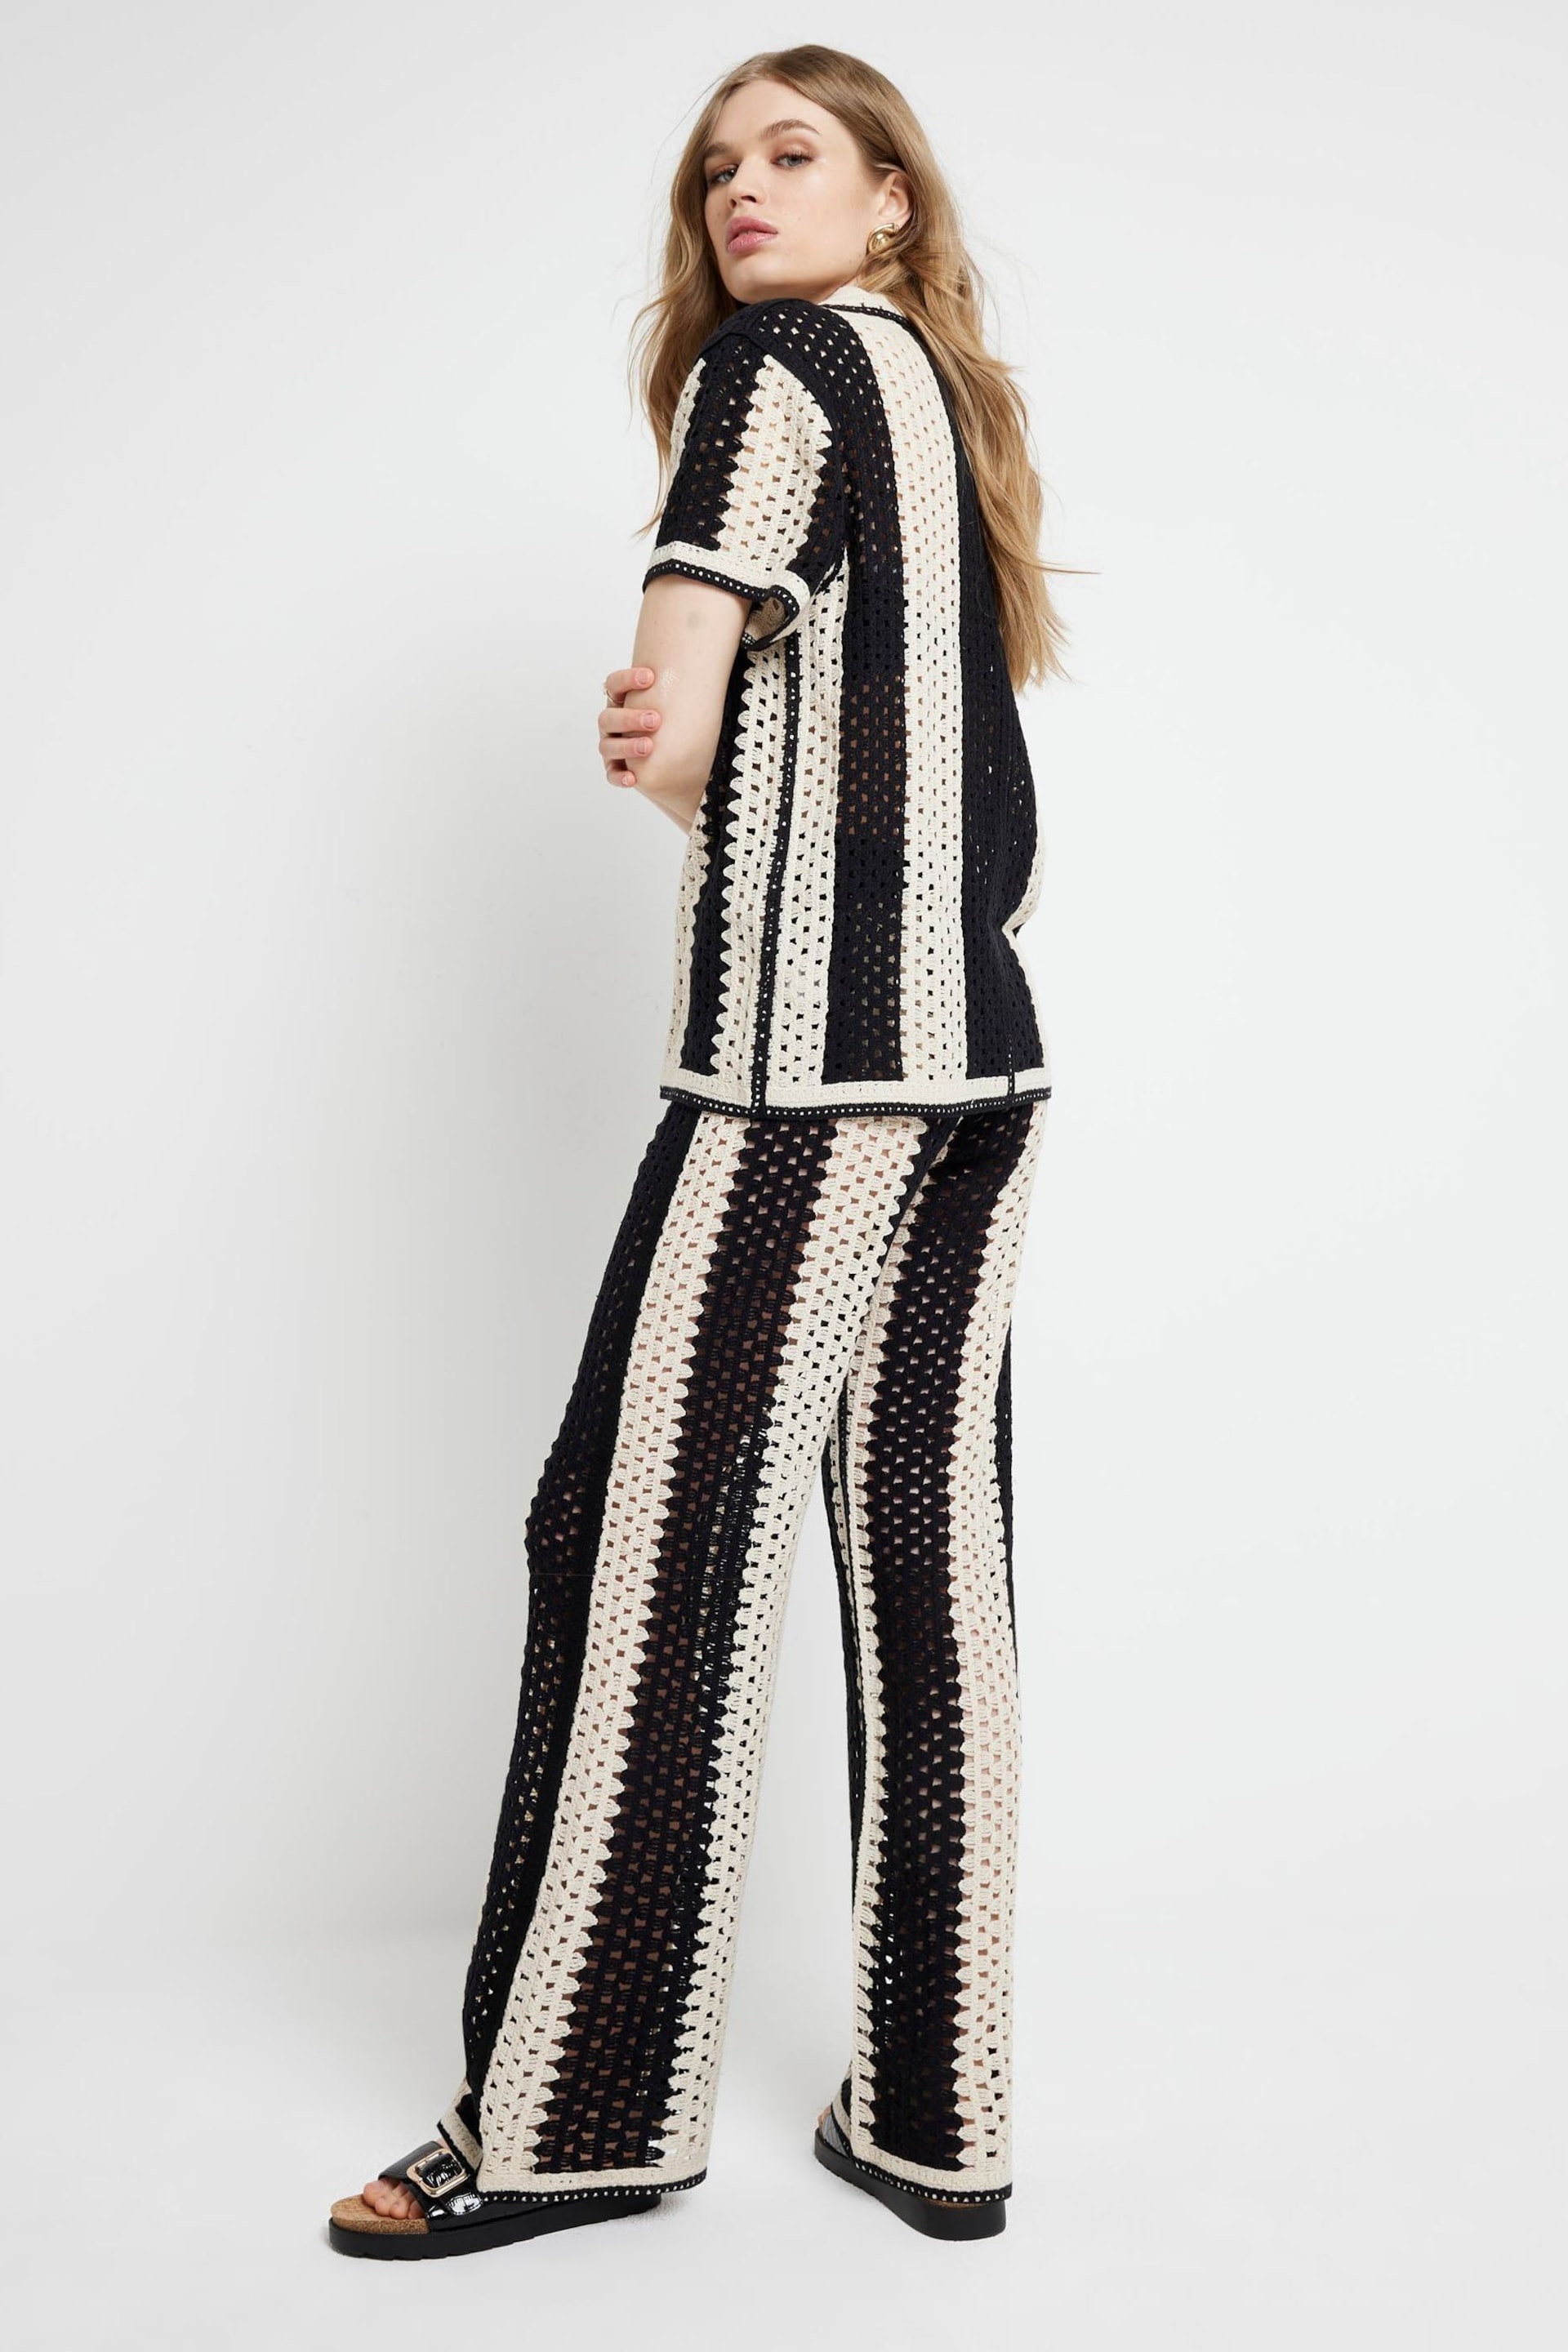 River Island Black Striped Crochet Trousers - Image 2 of 3